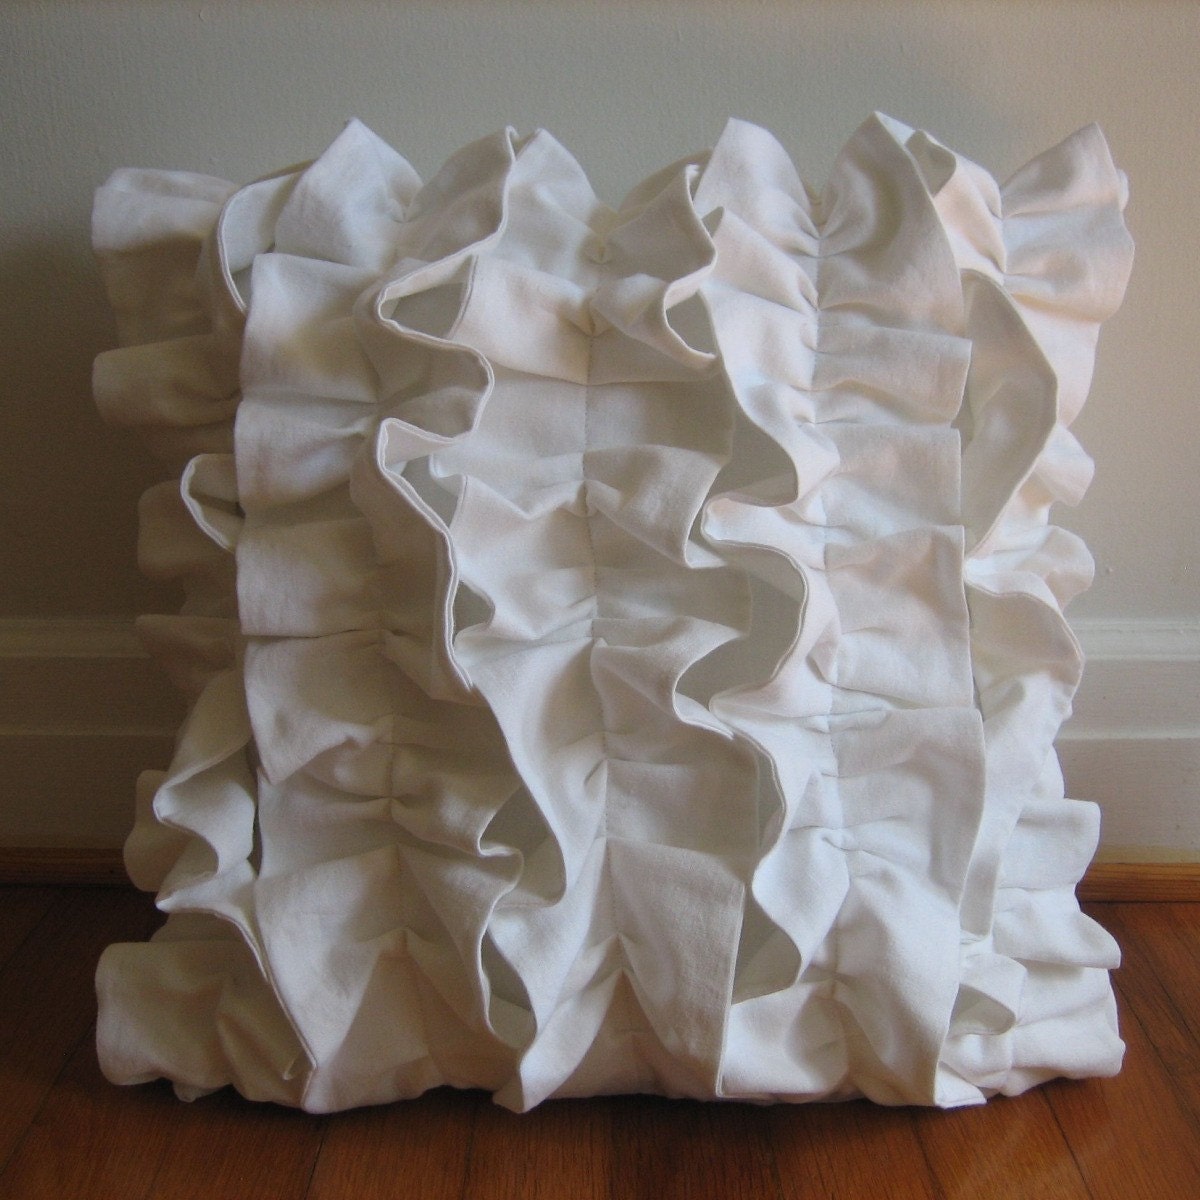 Five Ruffles Pillow Cover in White